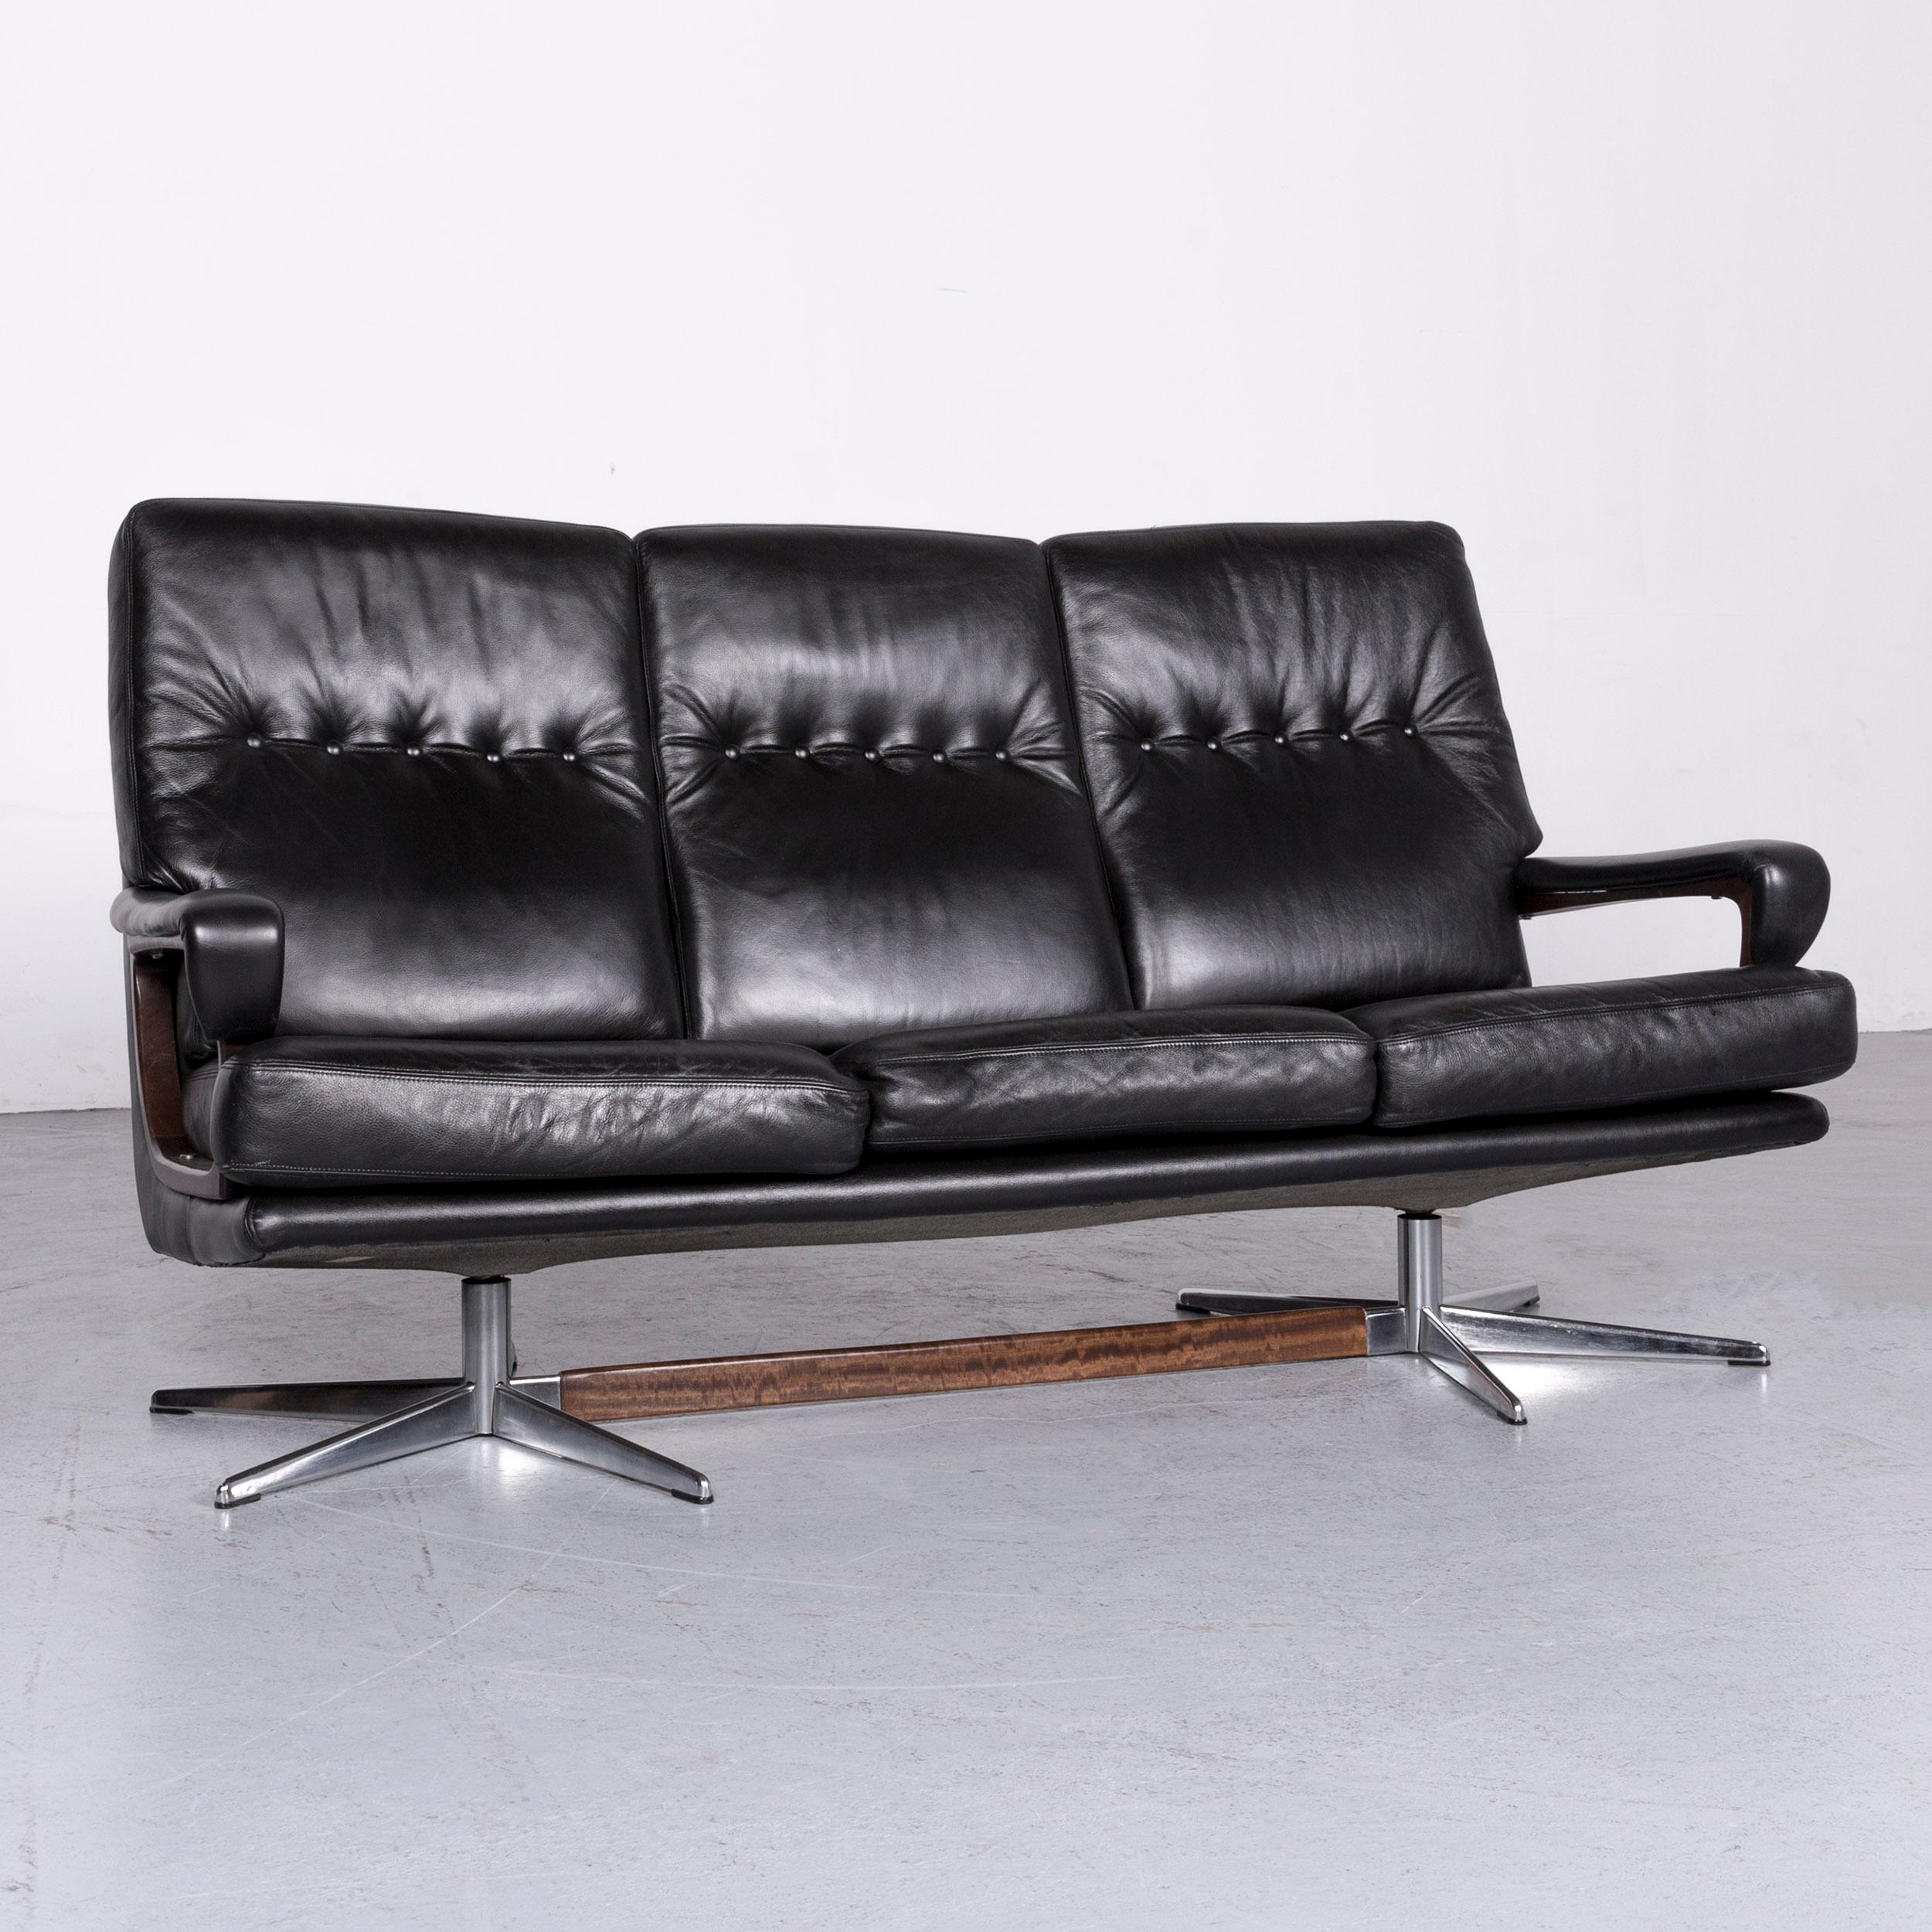 Swiss Strässle King Designer Black Leather Set: Armchair, Footstool, Three-Seat Couch